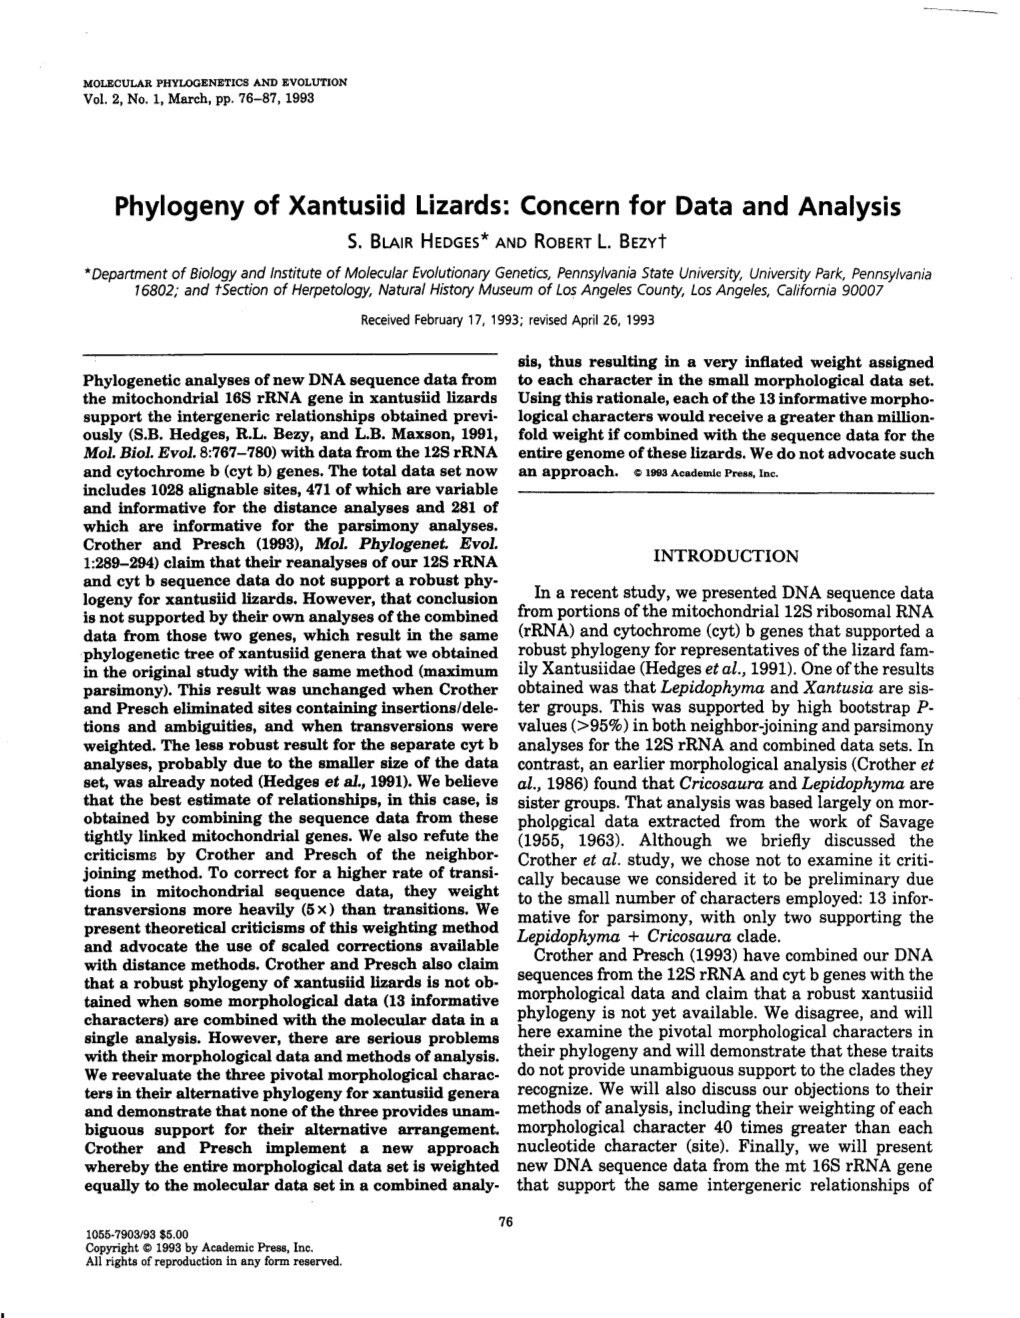 Phylogeny of Xantusiid Lizards: Concern for Data and Analysis